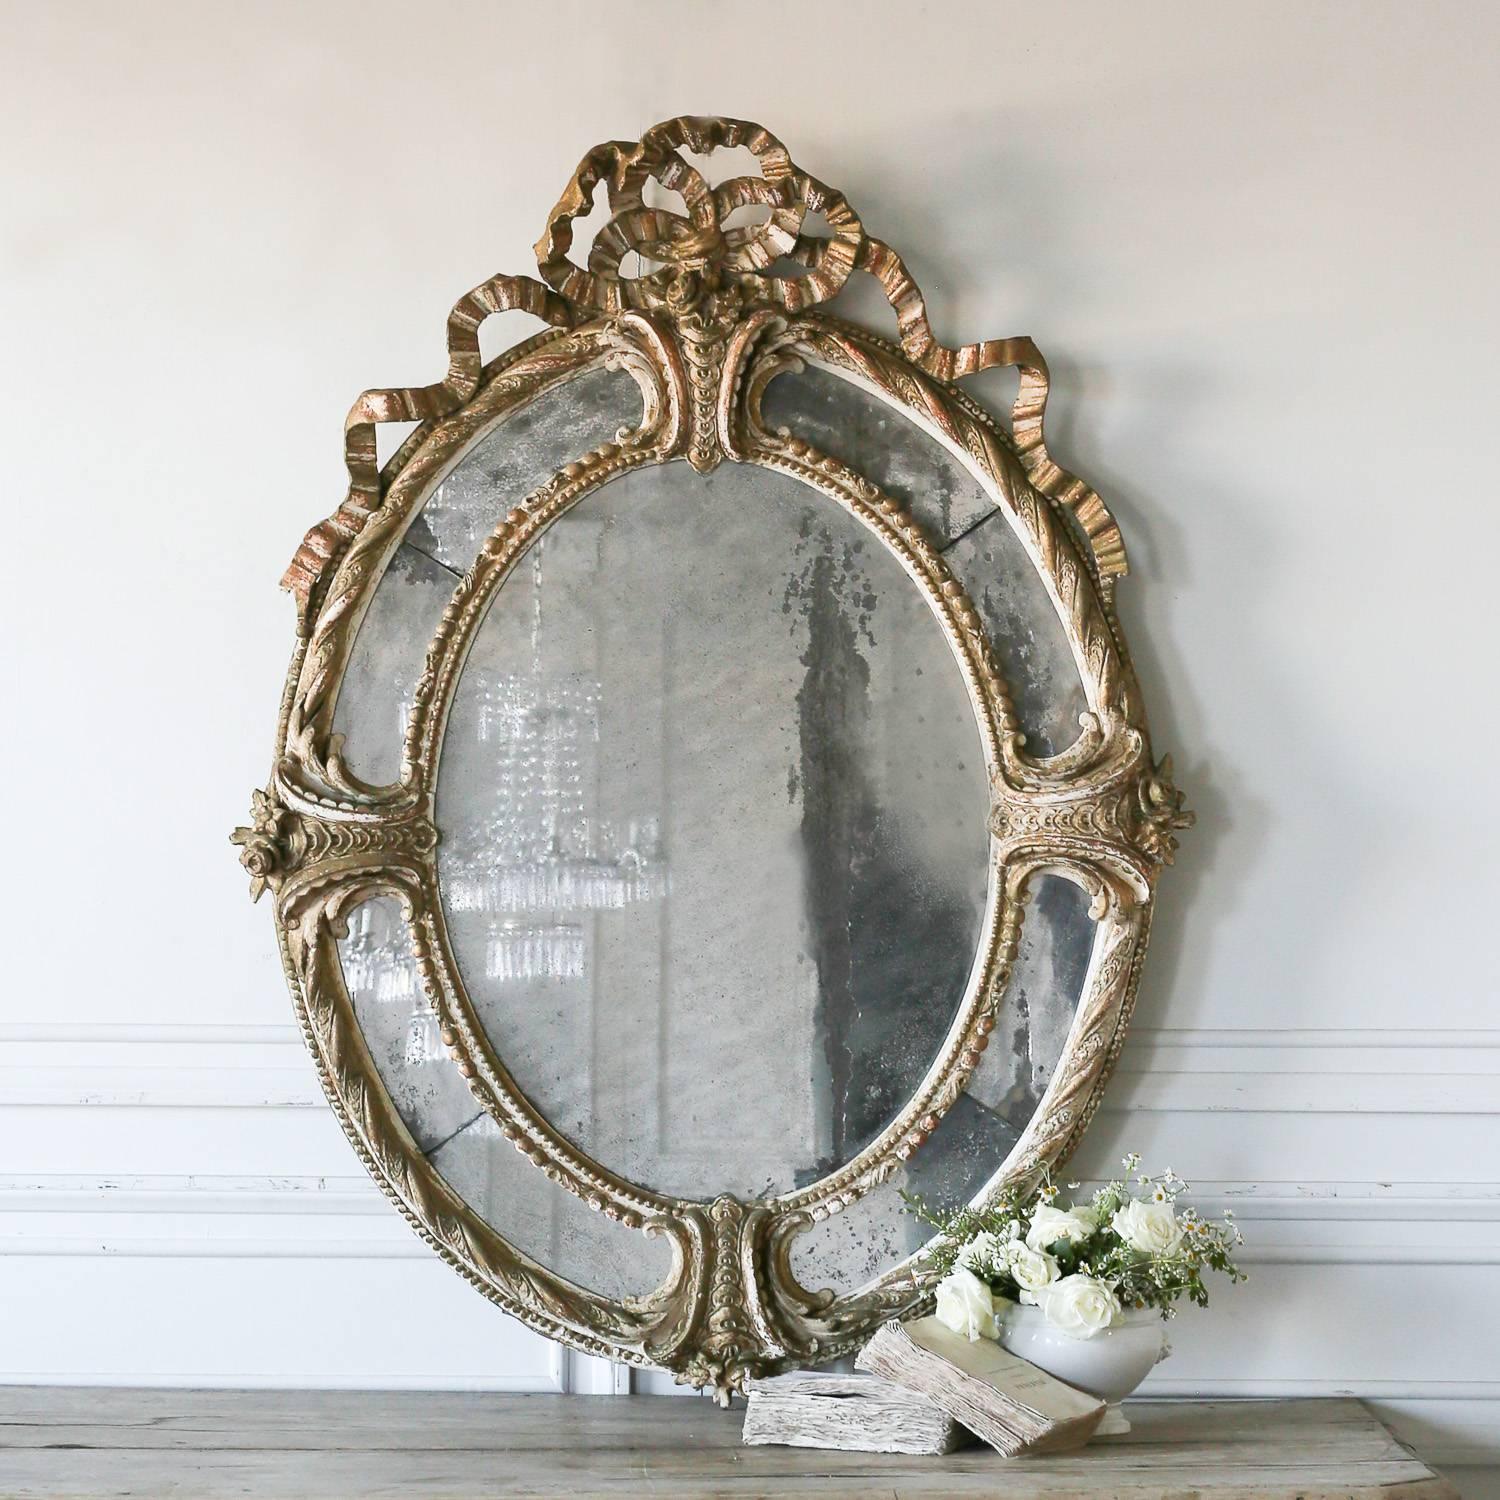 Antique oval mirror with heavily distressed, original mercury glass. A large bow crest sits atop this multi-sectioned mirror with large fern-like waves adorning the sides. Four divided sections create a unique design inspiring a special connection